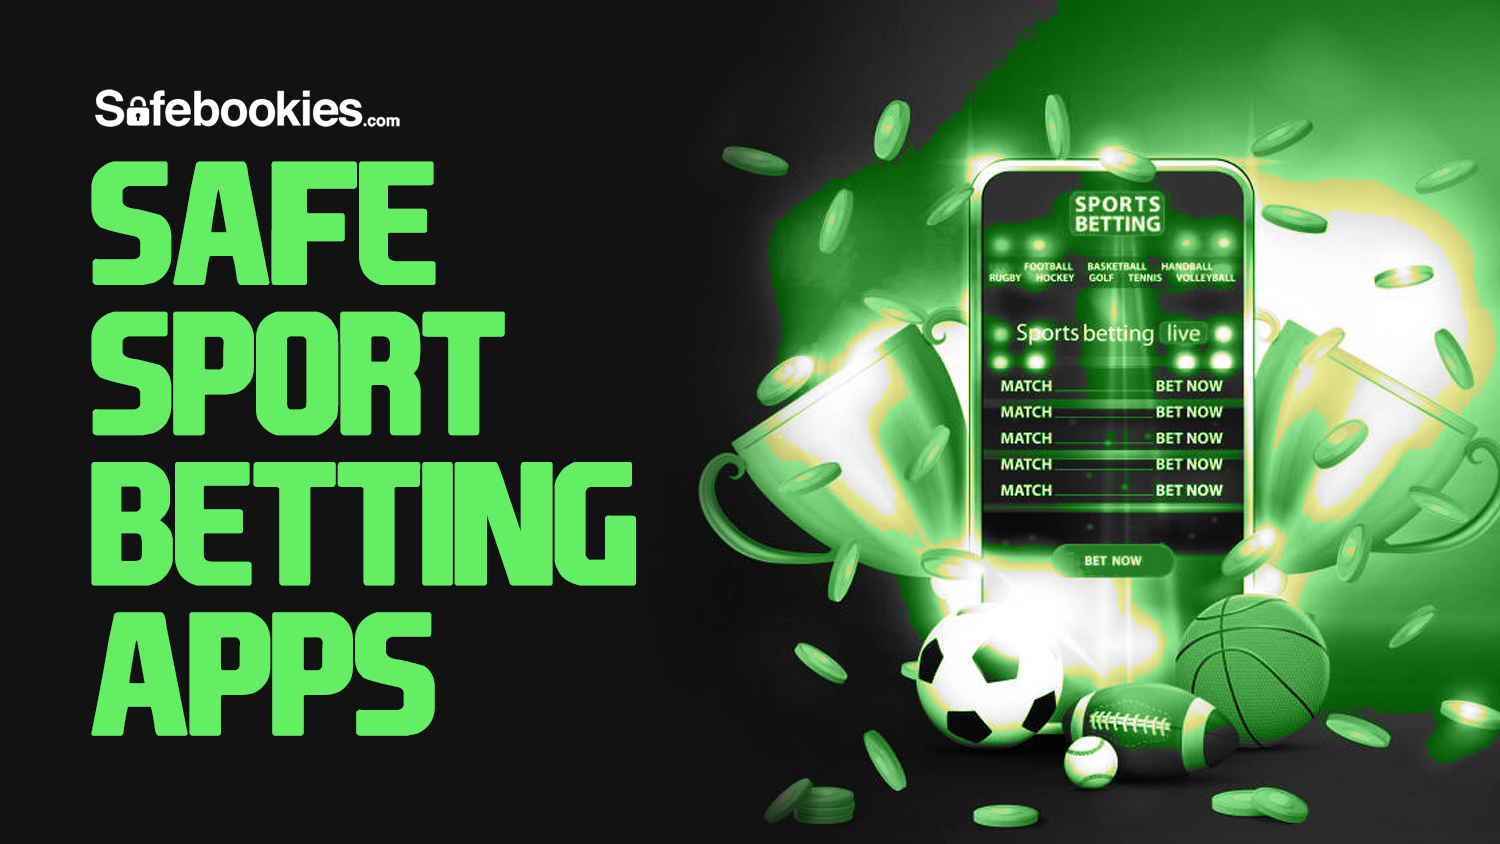 Safe sports betting apps online